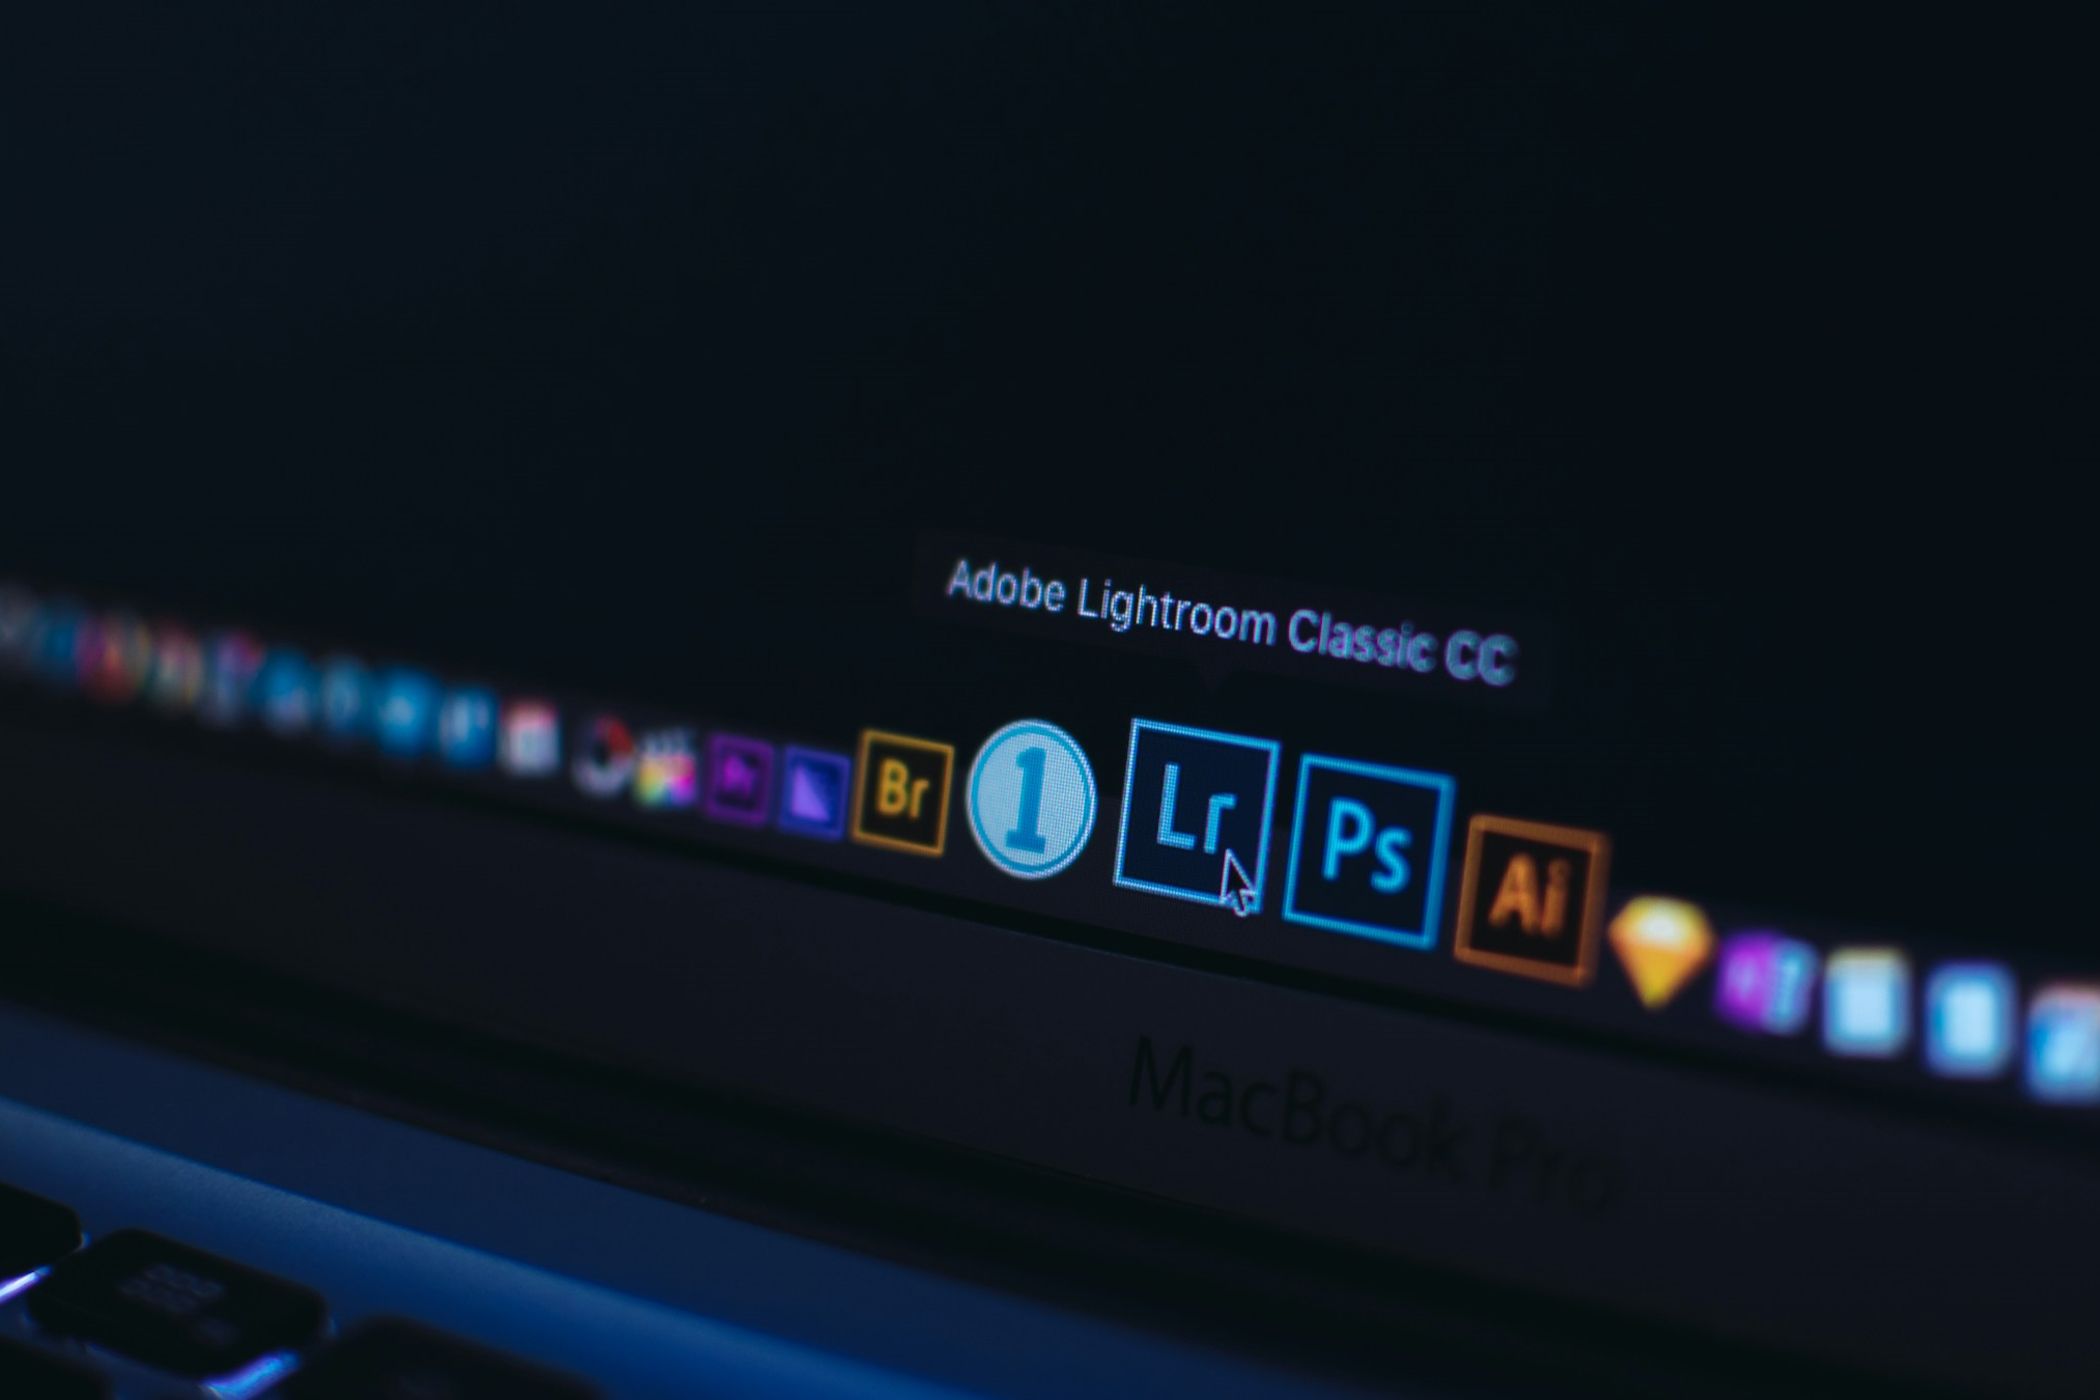 Adobe Lightroom is getting new AI features to improve your photos